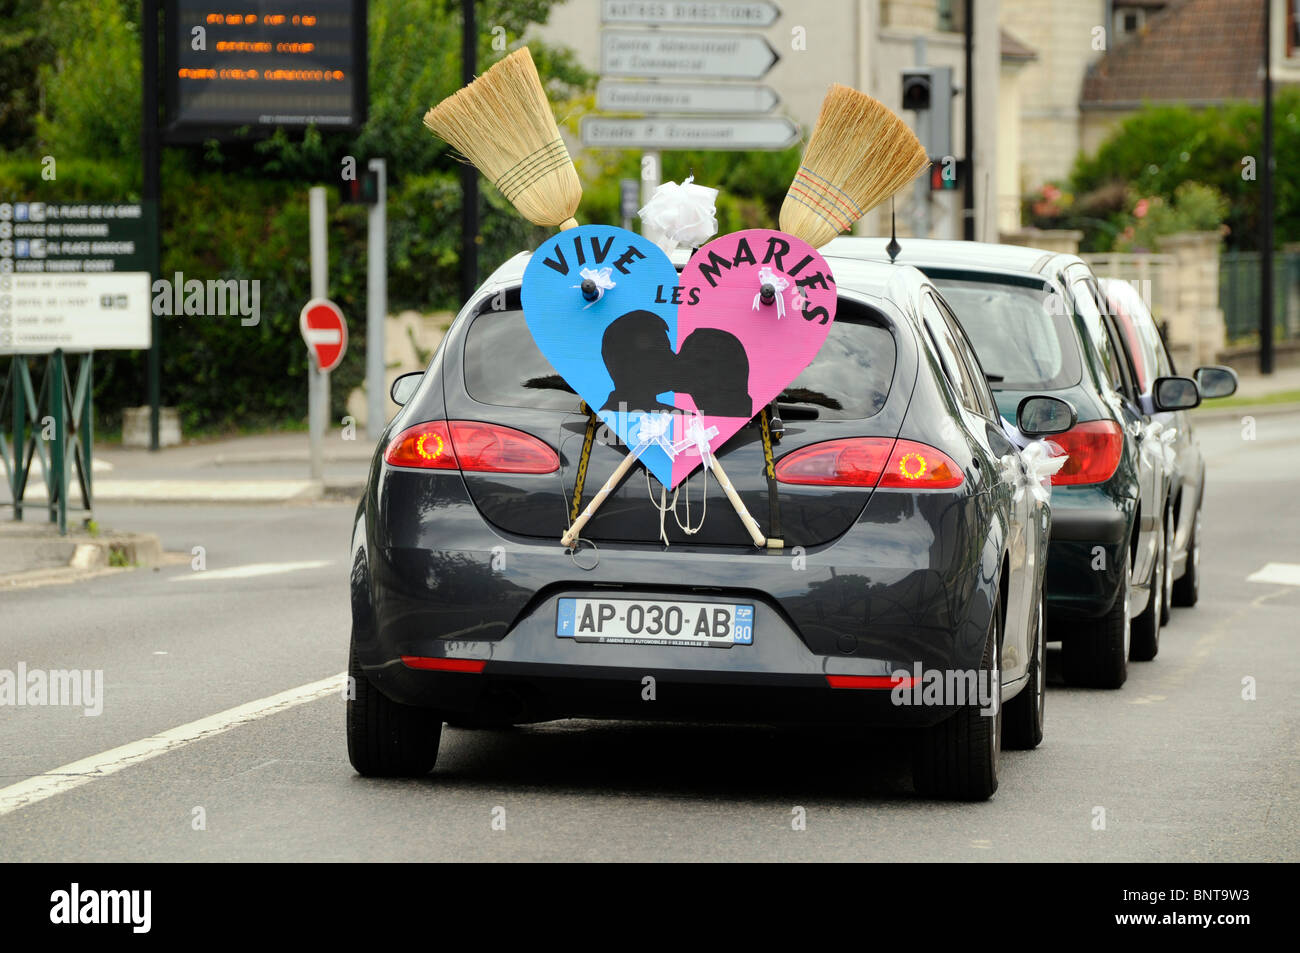 French just married sign on back of car. Stock Photo